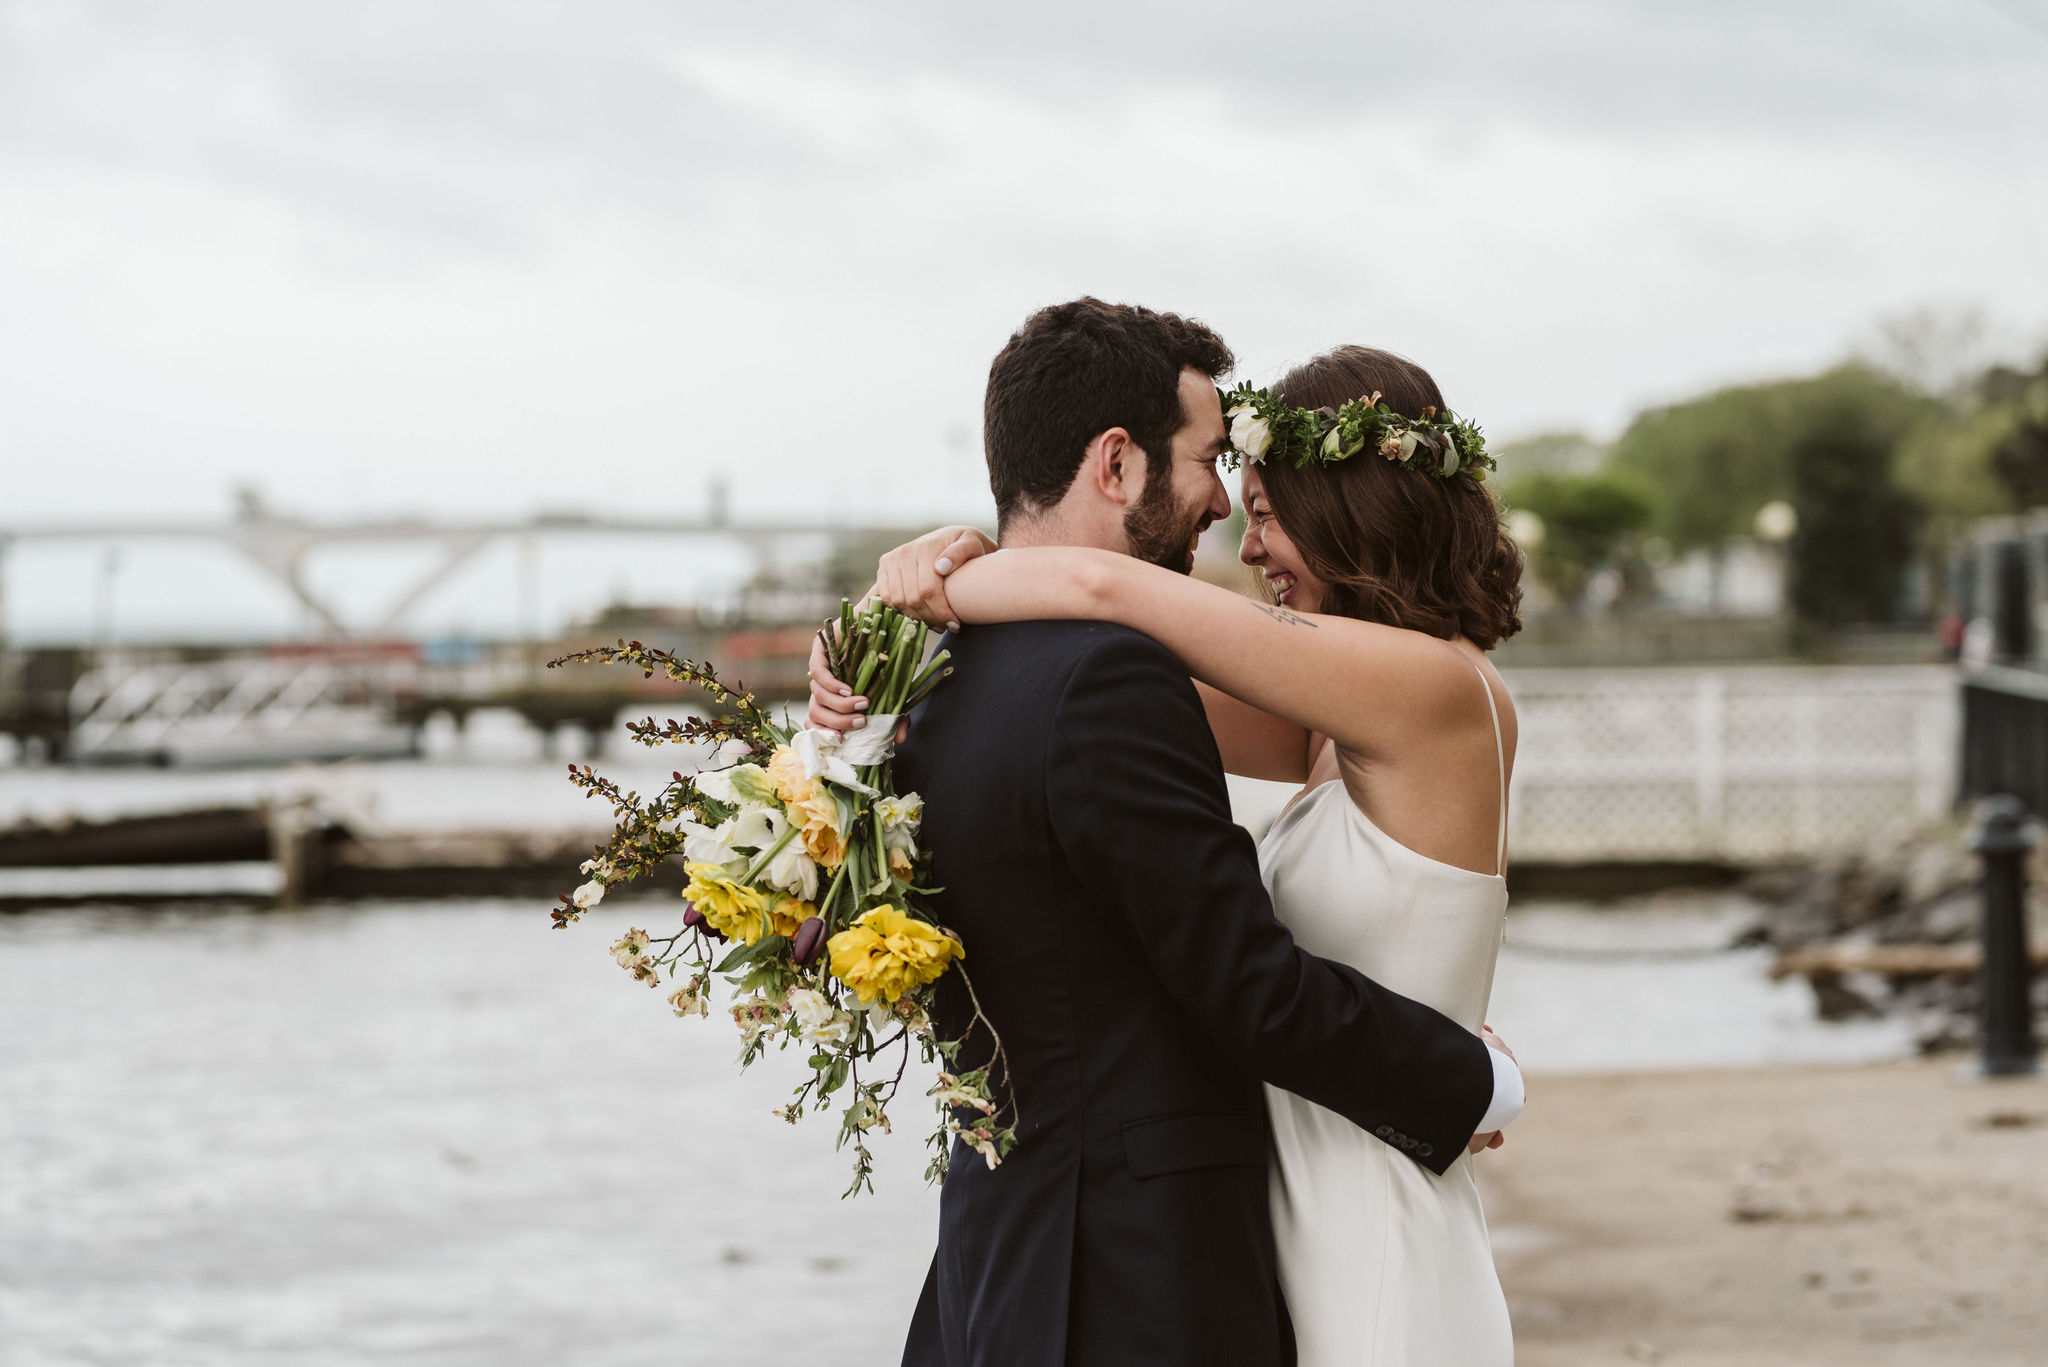  Washington DC, Baltimore Wedding Photographer, Alexandria, Old Town, Jewel Tone, Romantic, Modern, Bride and Groom Hugging and Laughing Together, Waterfront, Sungold Flower Co 